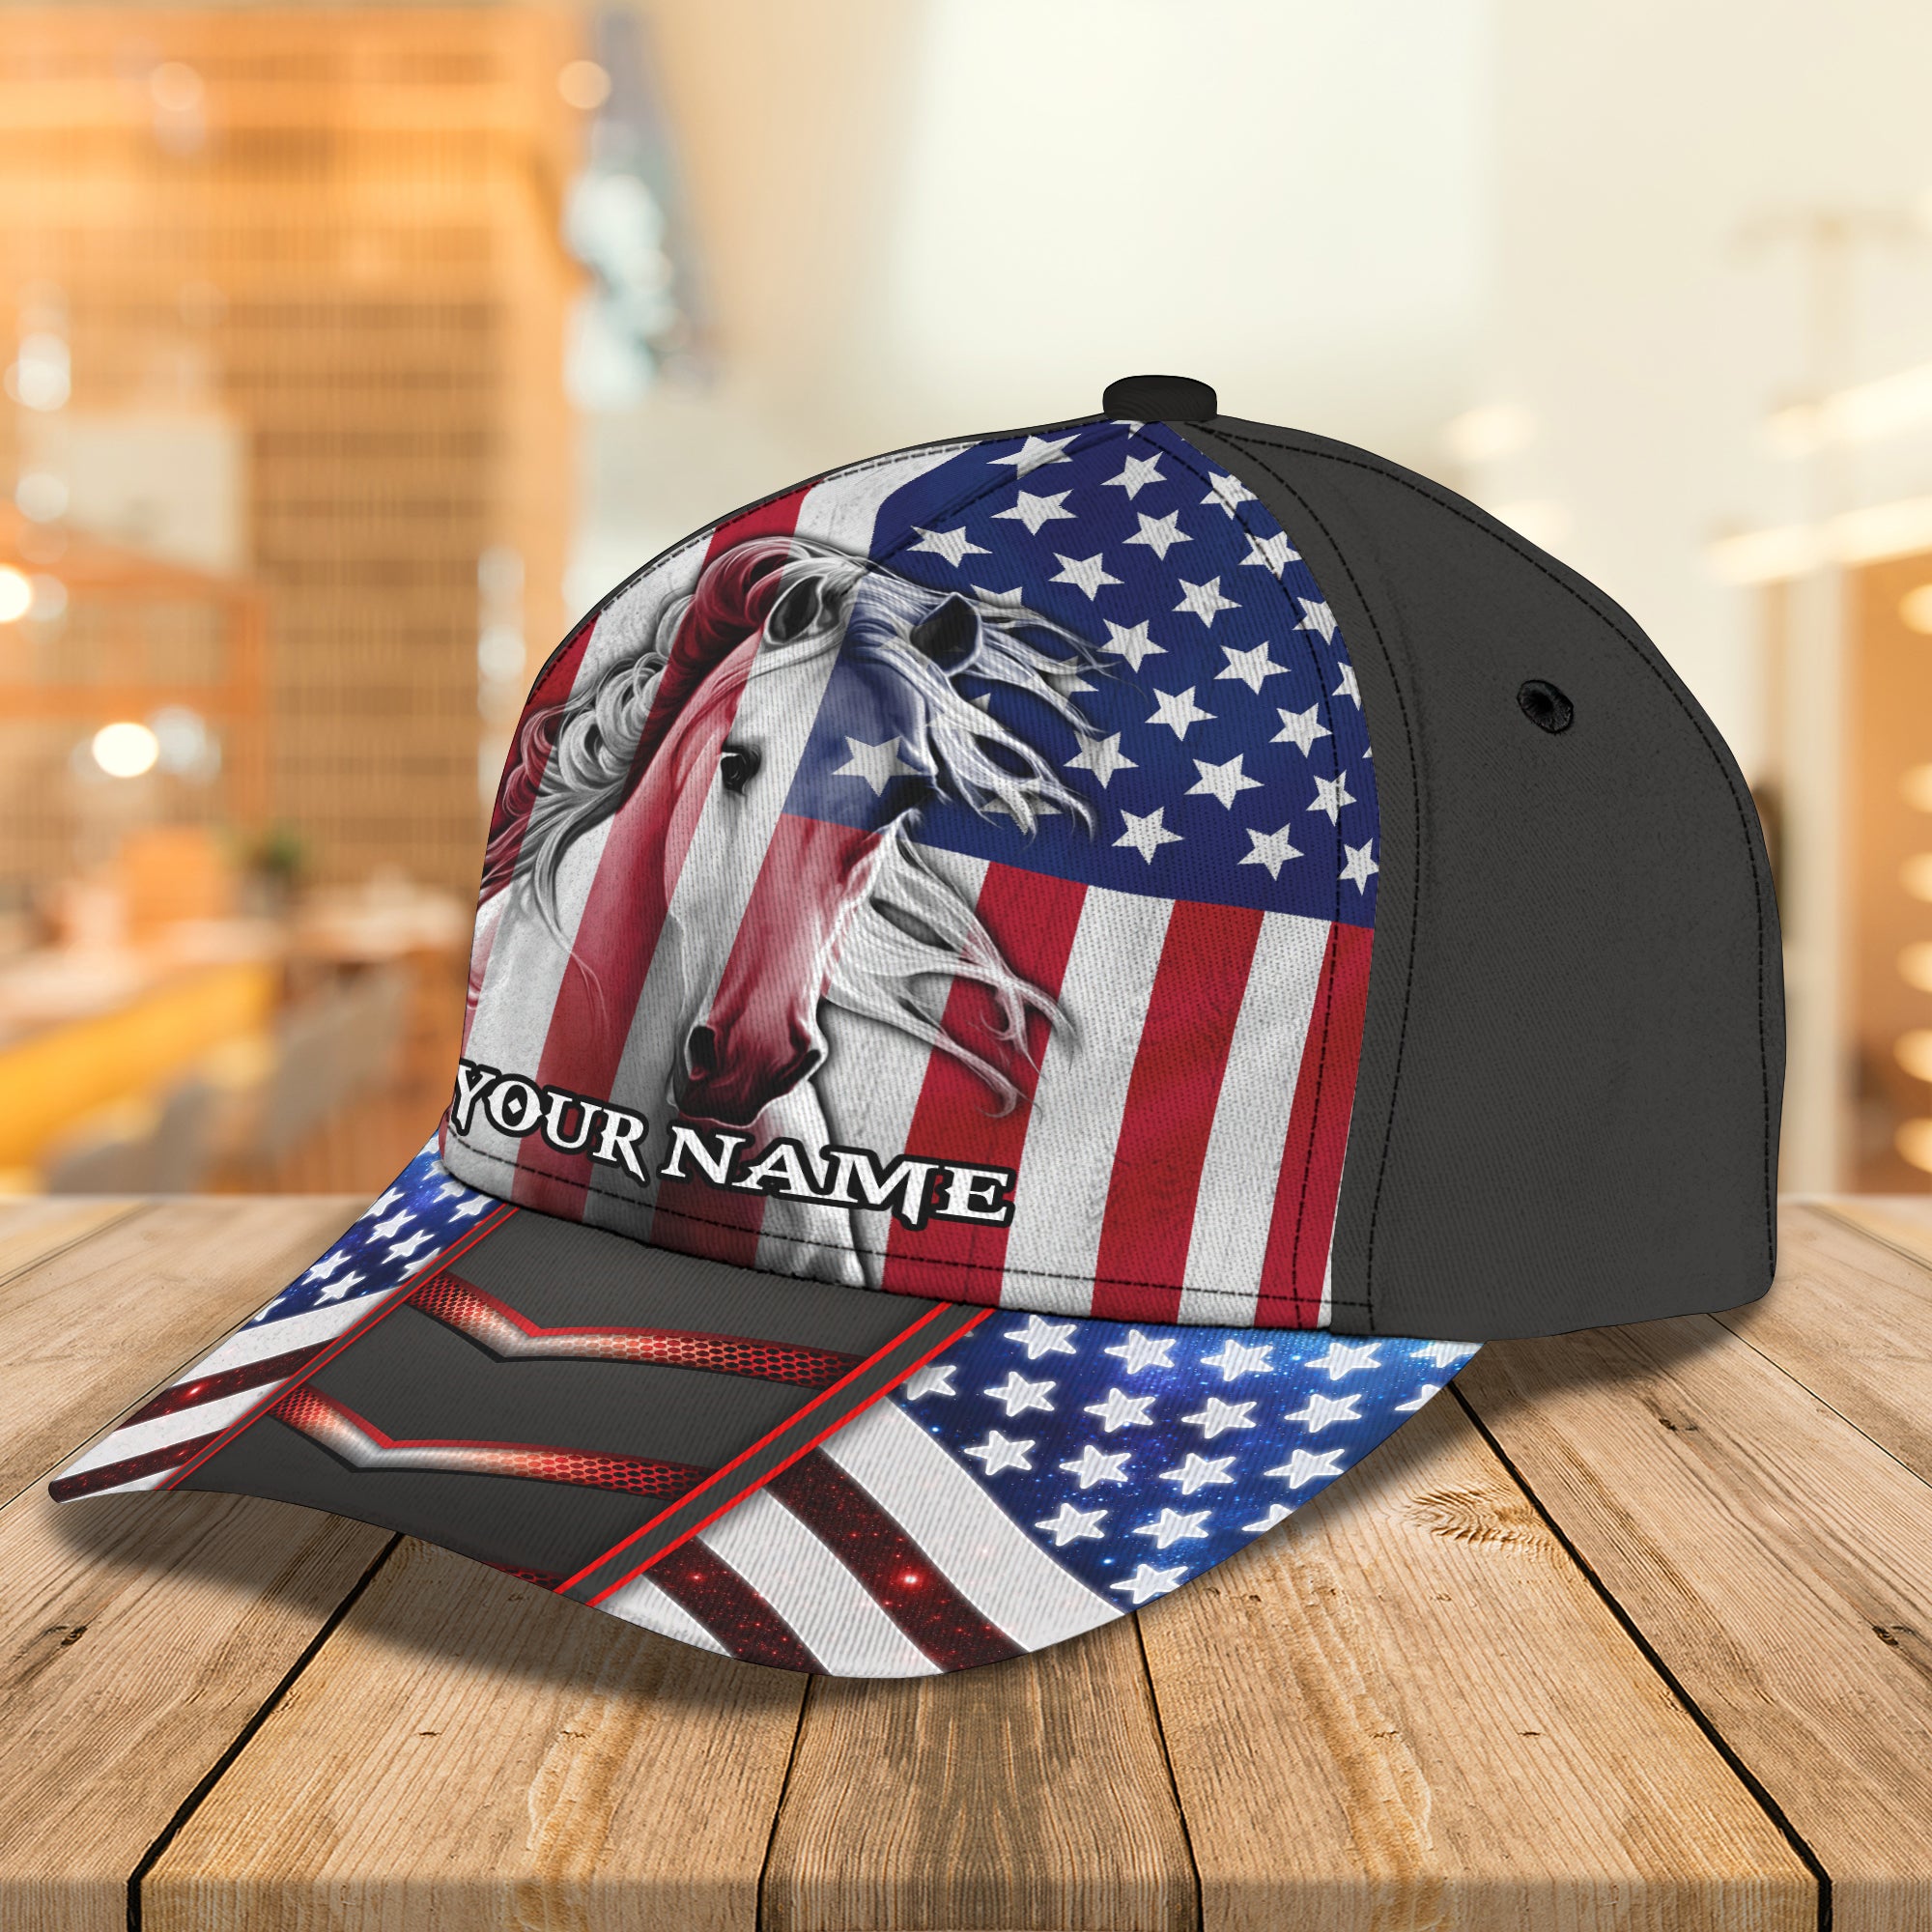 Horse - Personalized Name Cap - Tra96